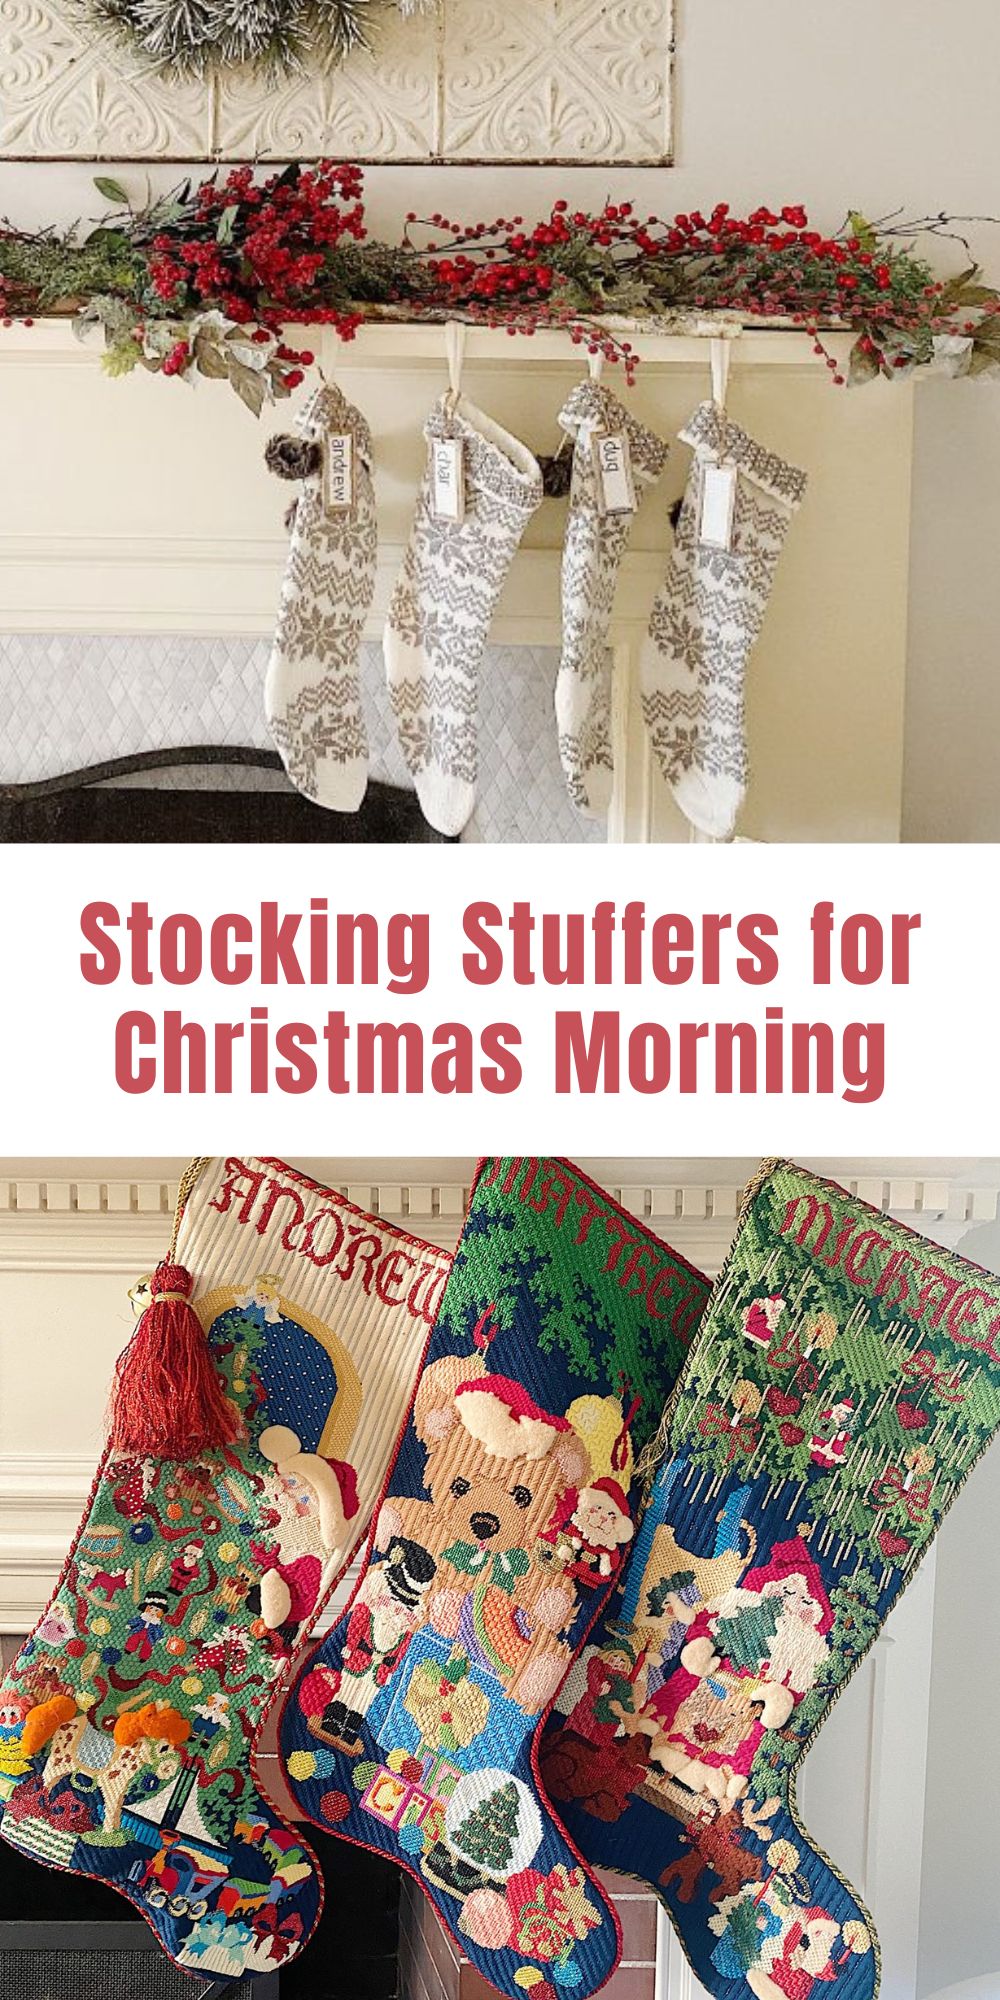 Welcome to Day 10! Christmas morning is a time of anticipation and excitement. Here are some stocking stuffers for Christmas morning that will delight children of all ages!